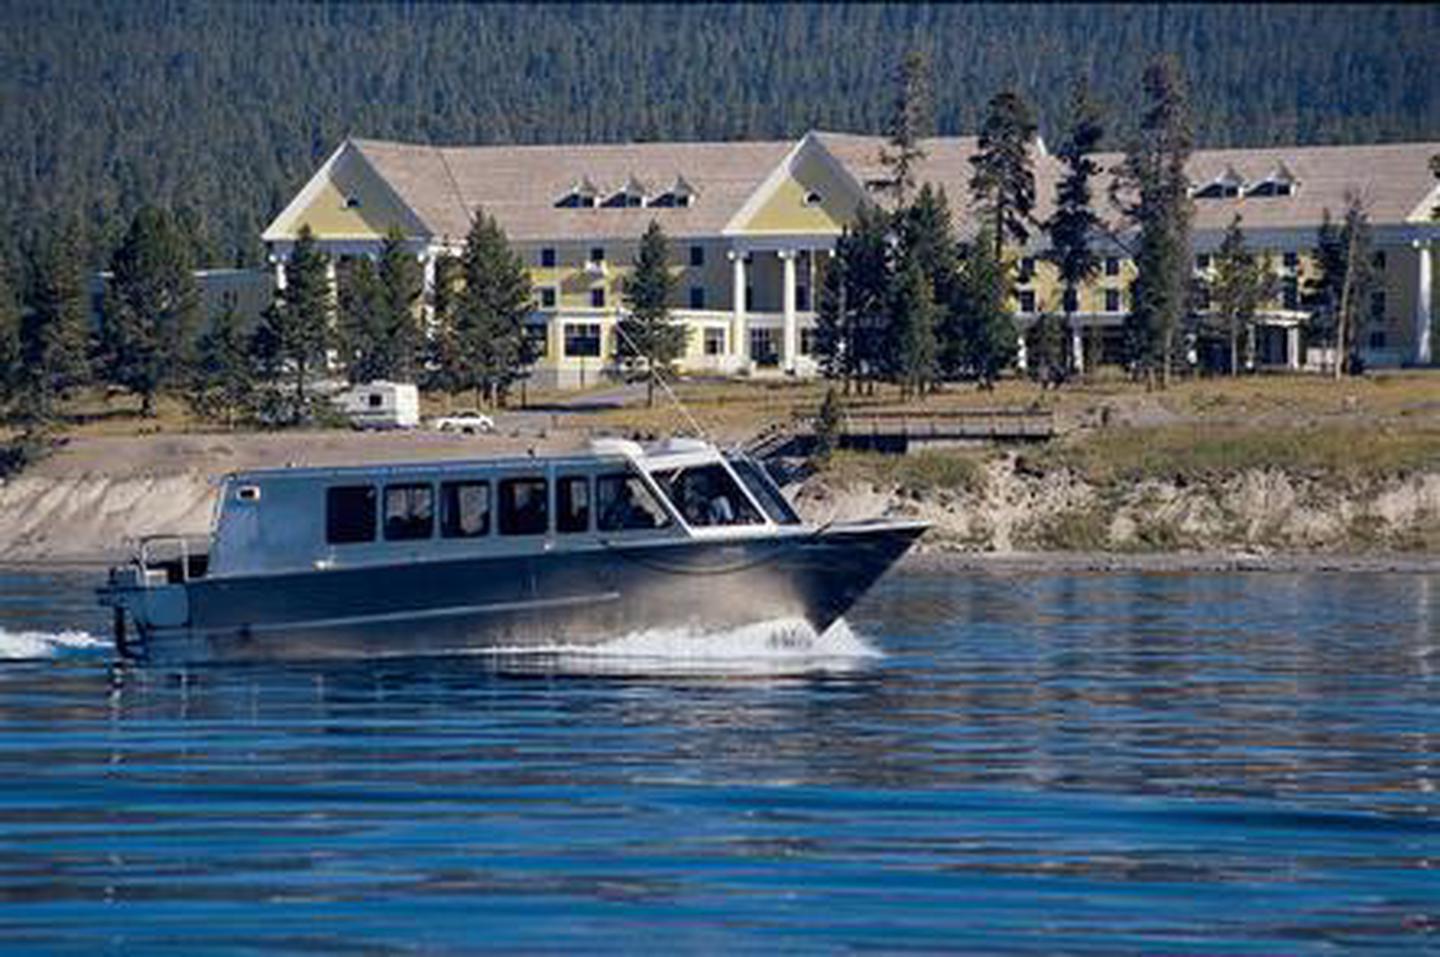 Scenic Cruise If renting a boat isn't your speed, the Yellowstone Lake Scenicruise offers a one hour tour of the lake's history and natural flora and fauna.